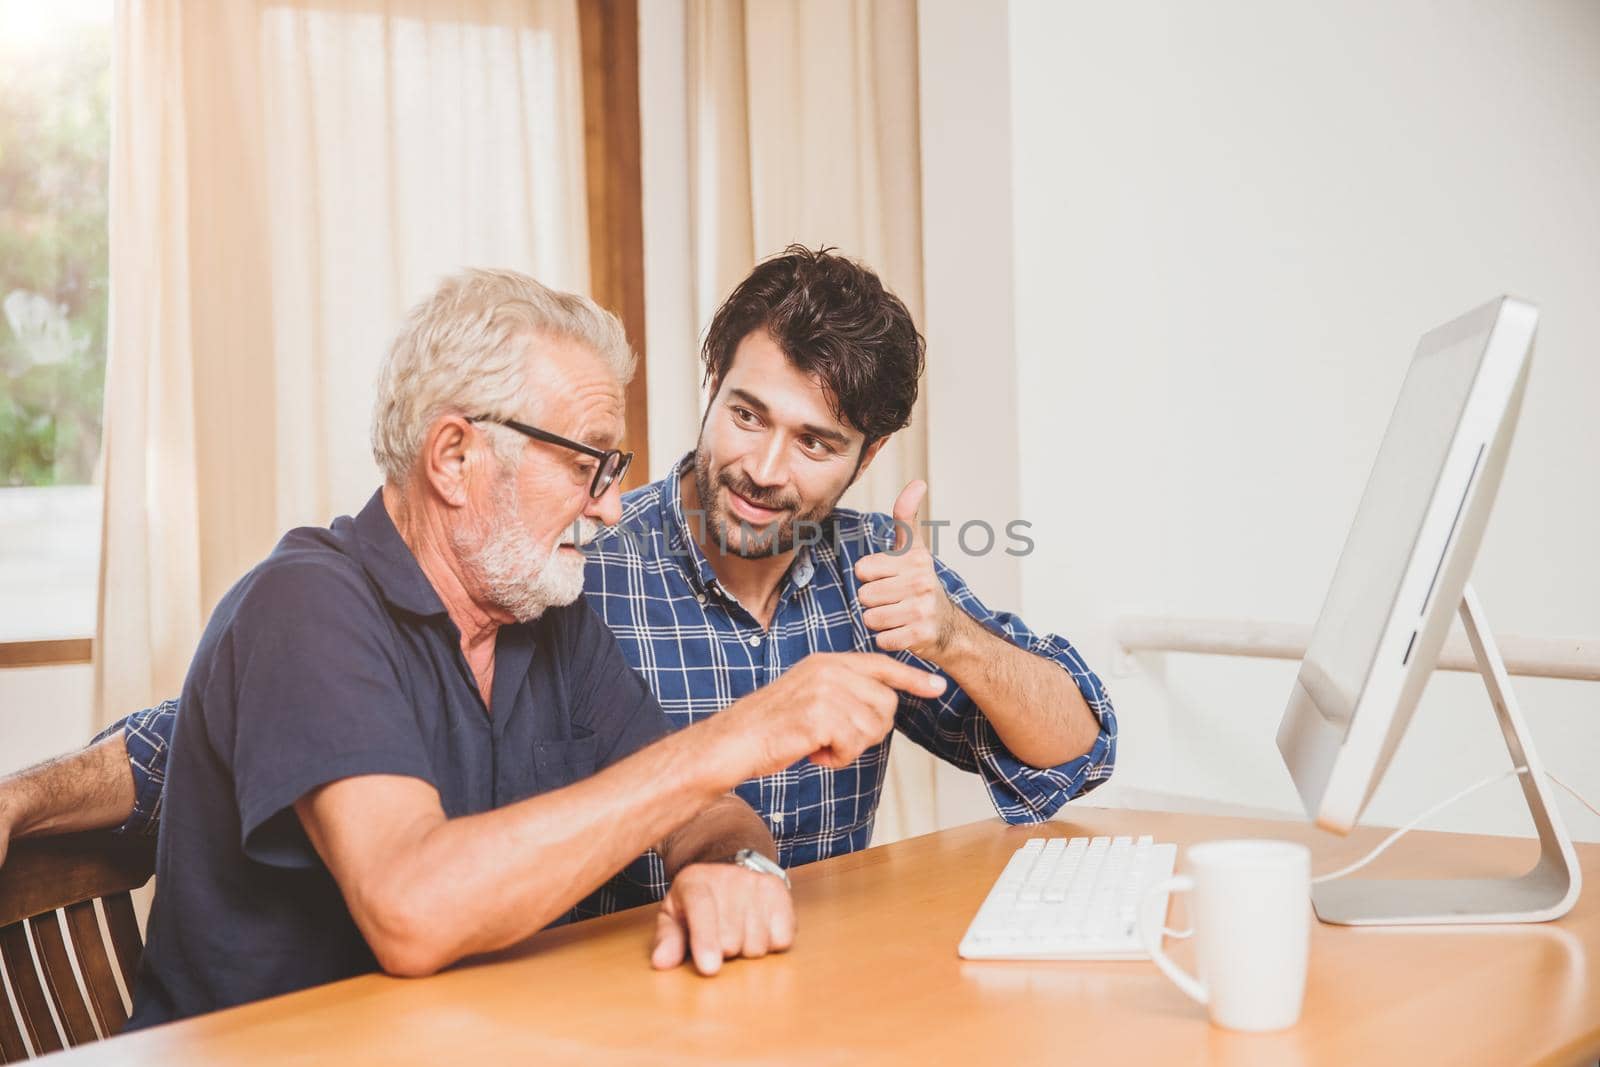 young man or son teaching his grandfather elderly dad learning to using computer at home. by qualitystocks